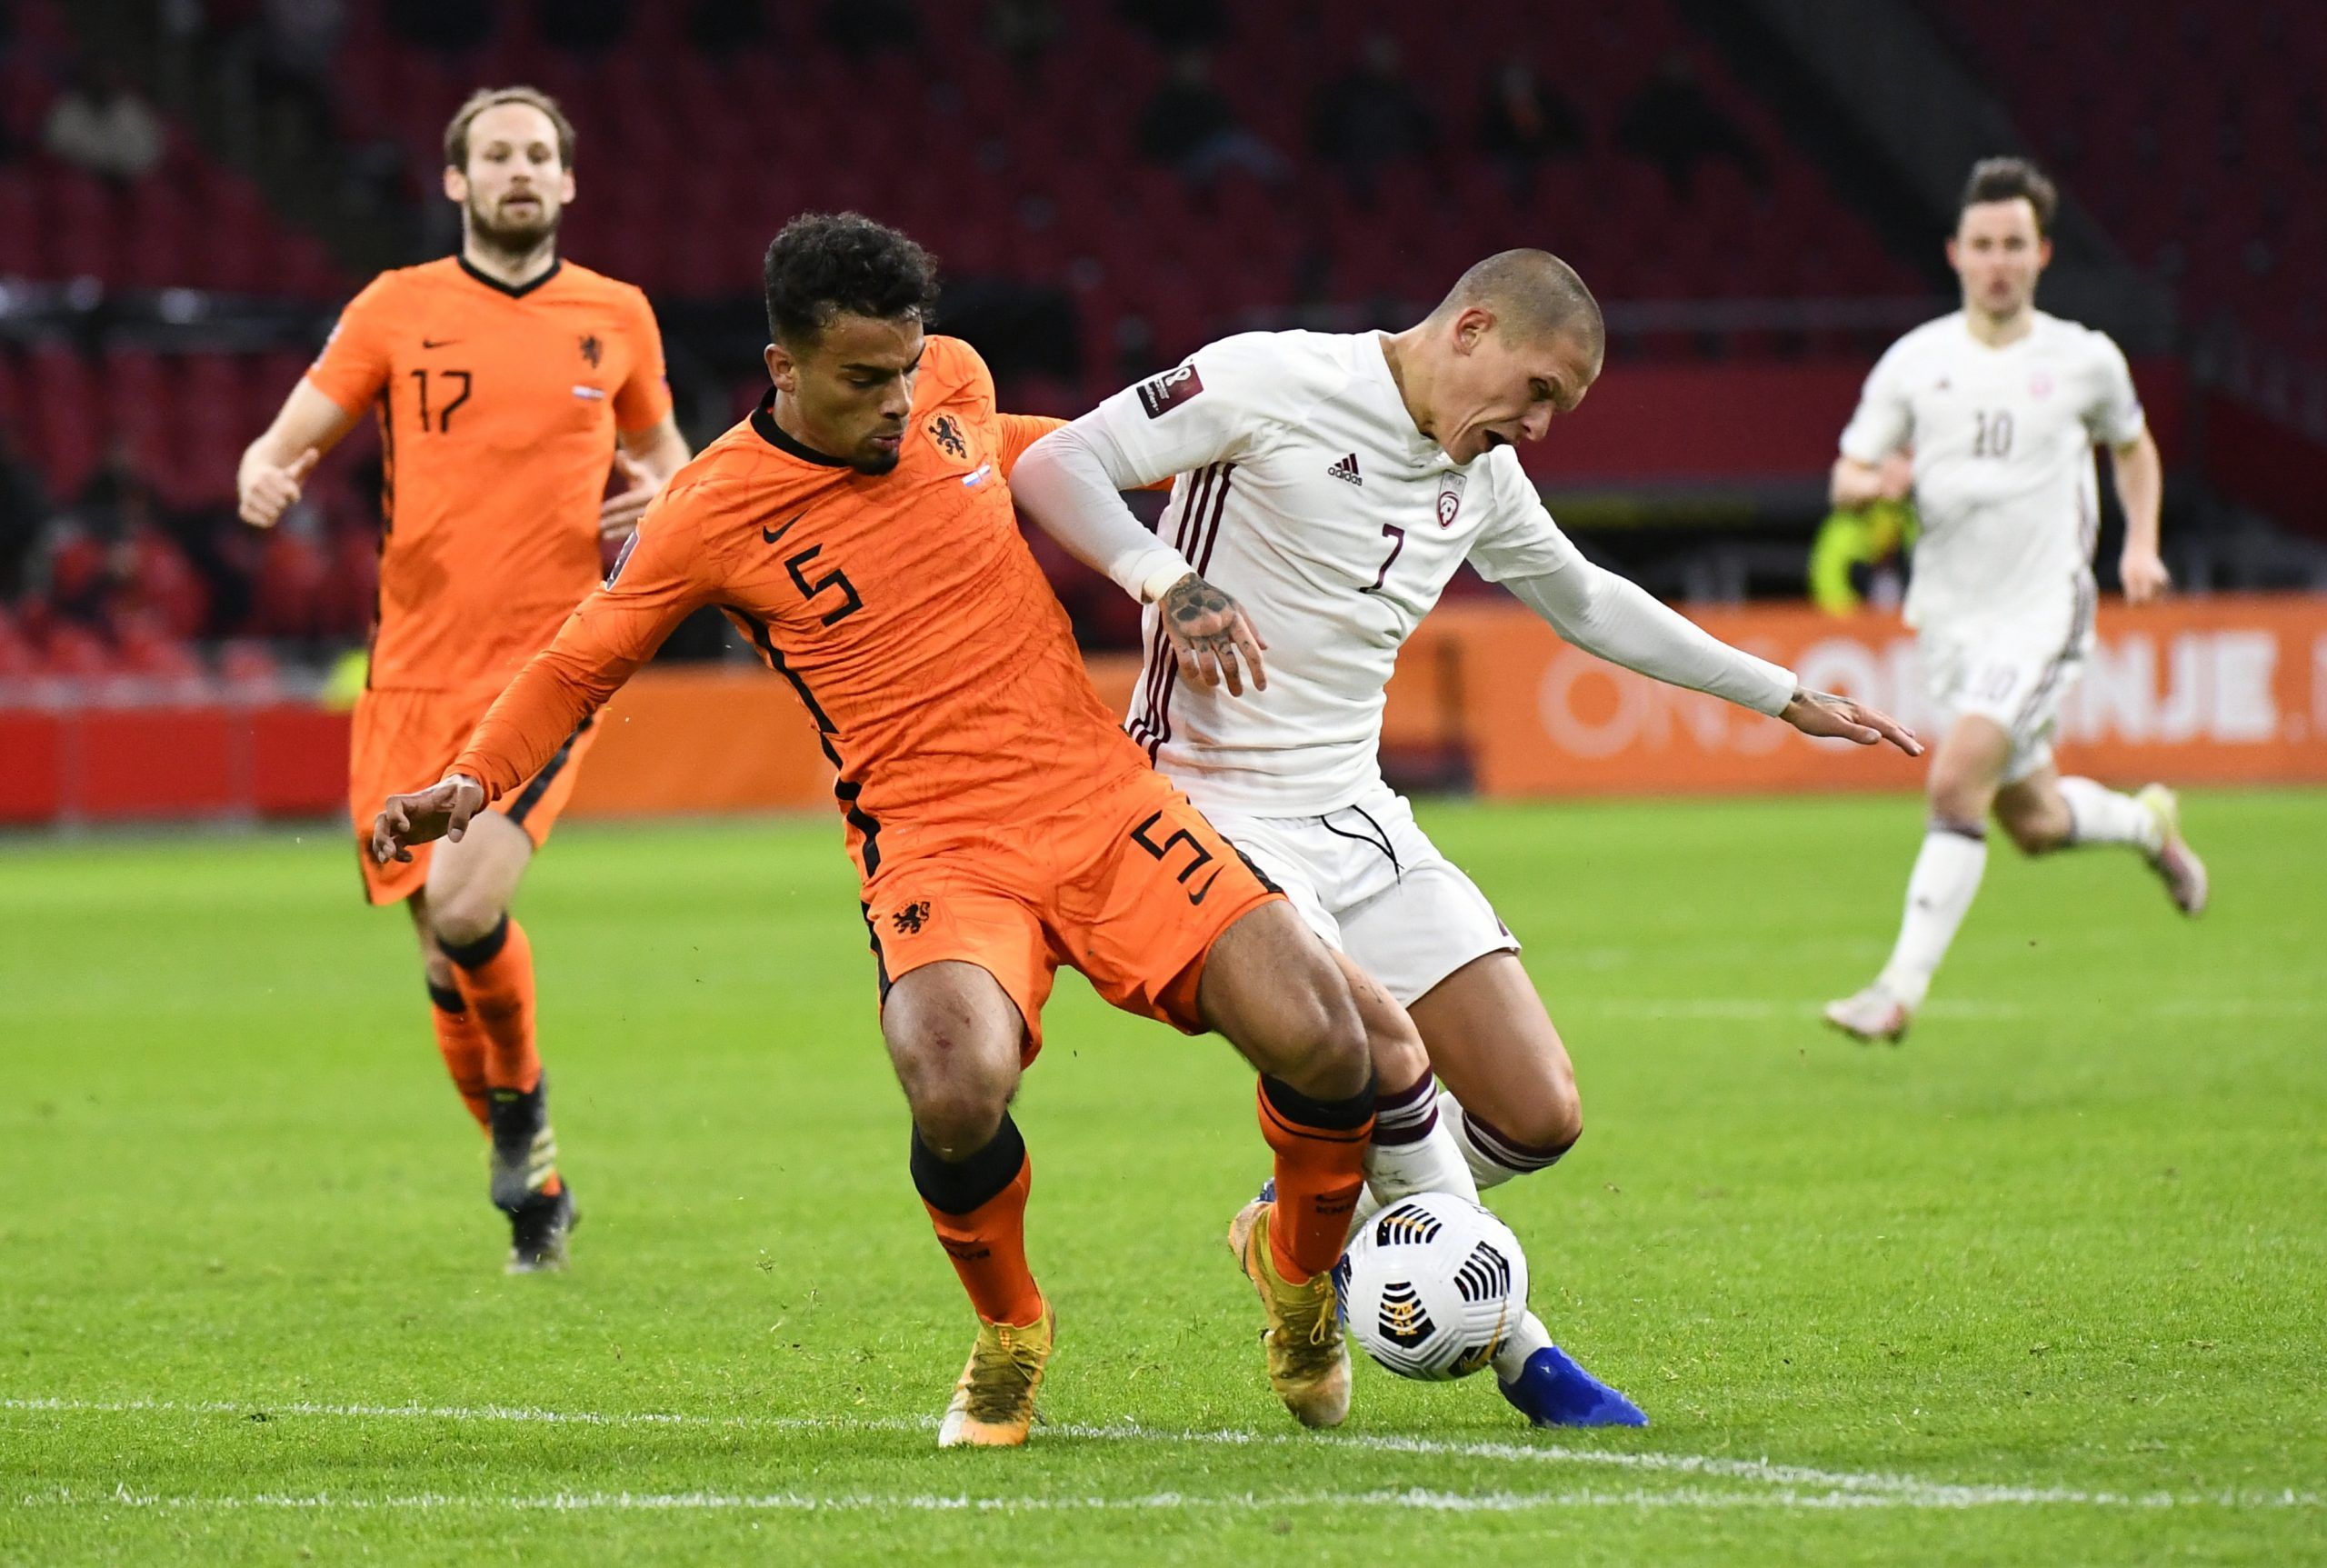 Soccer Football - World Cup Qualifiers Europe - Group G - Netherlands v Latvia - Amsterdam Arena, Amsterdam, Netherlands - March 27, 2021 Netherlands' Owen Wijndal in action with Latvia's Vladimirs Kamess REUTERS/Piroschka Van De Wouw